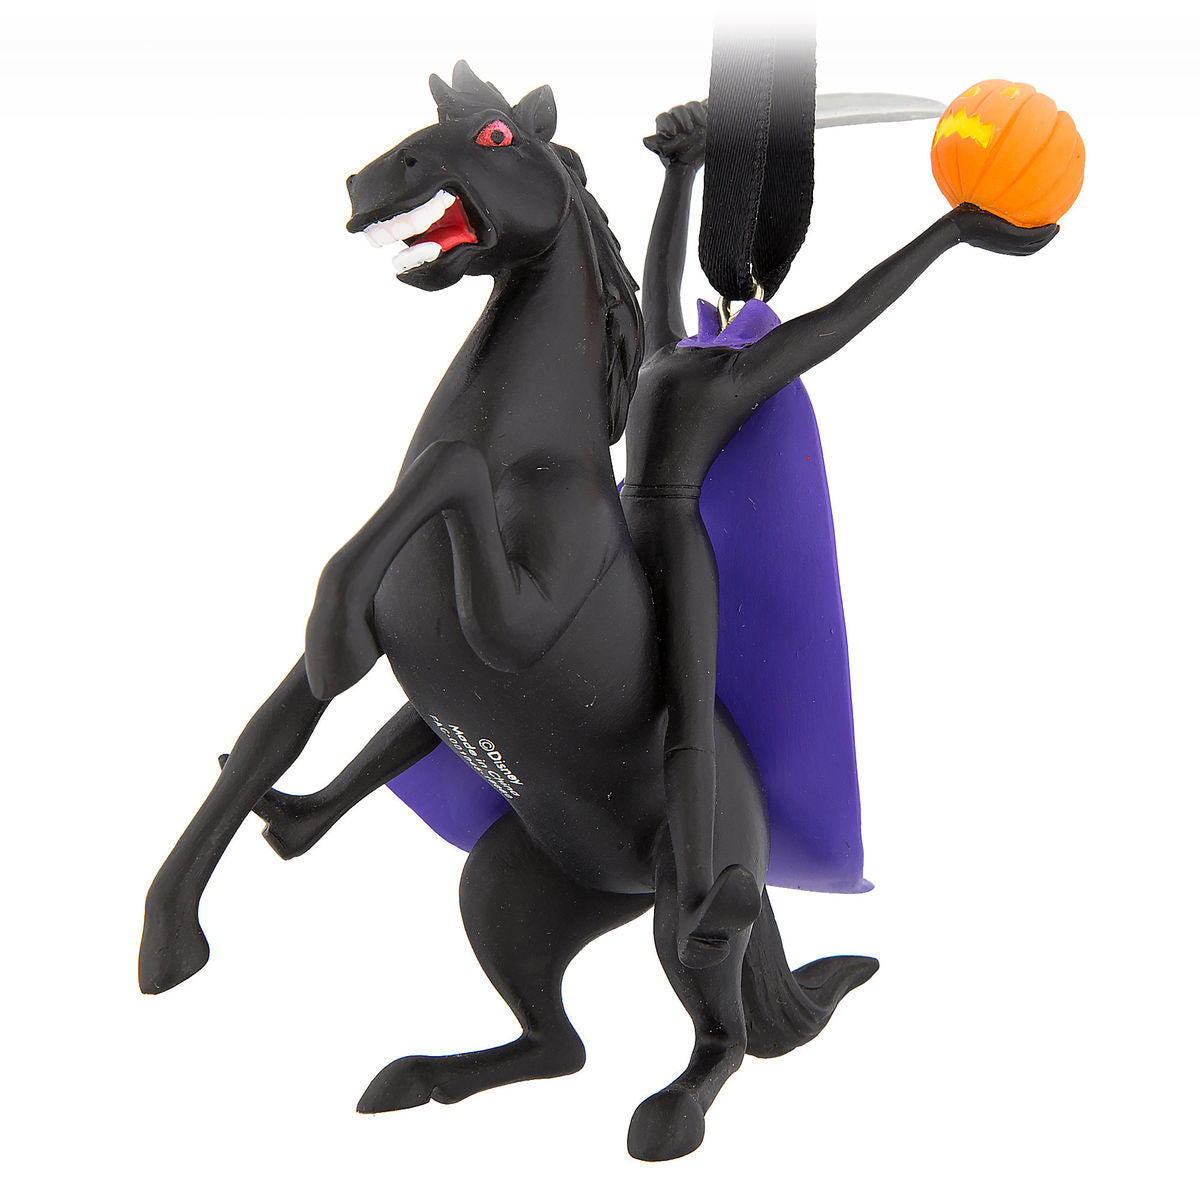 Disney Parks Halloween Headless Horseman Figural Ornament New with Tags